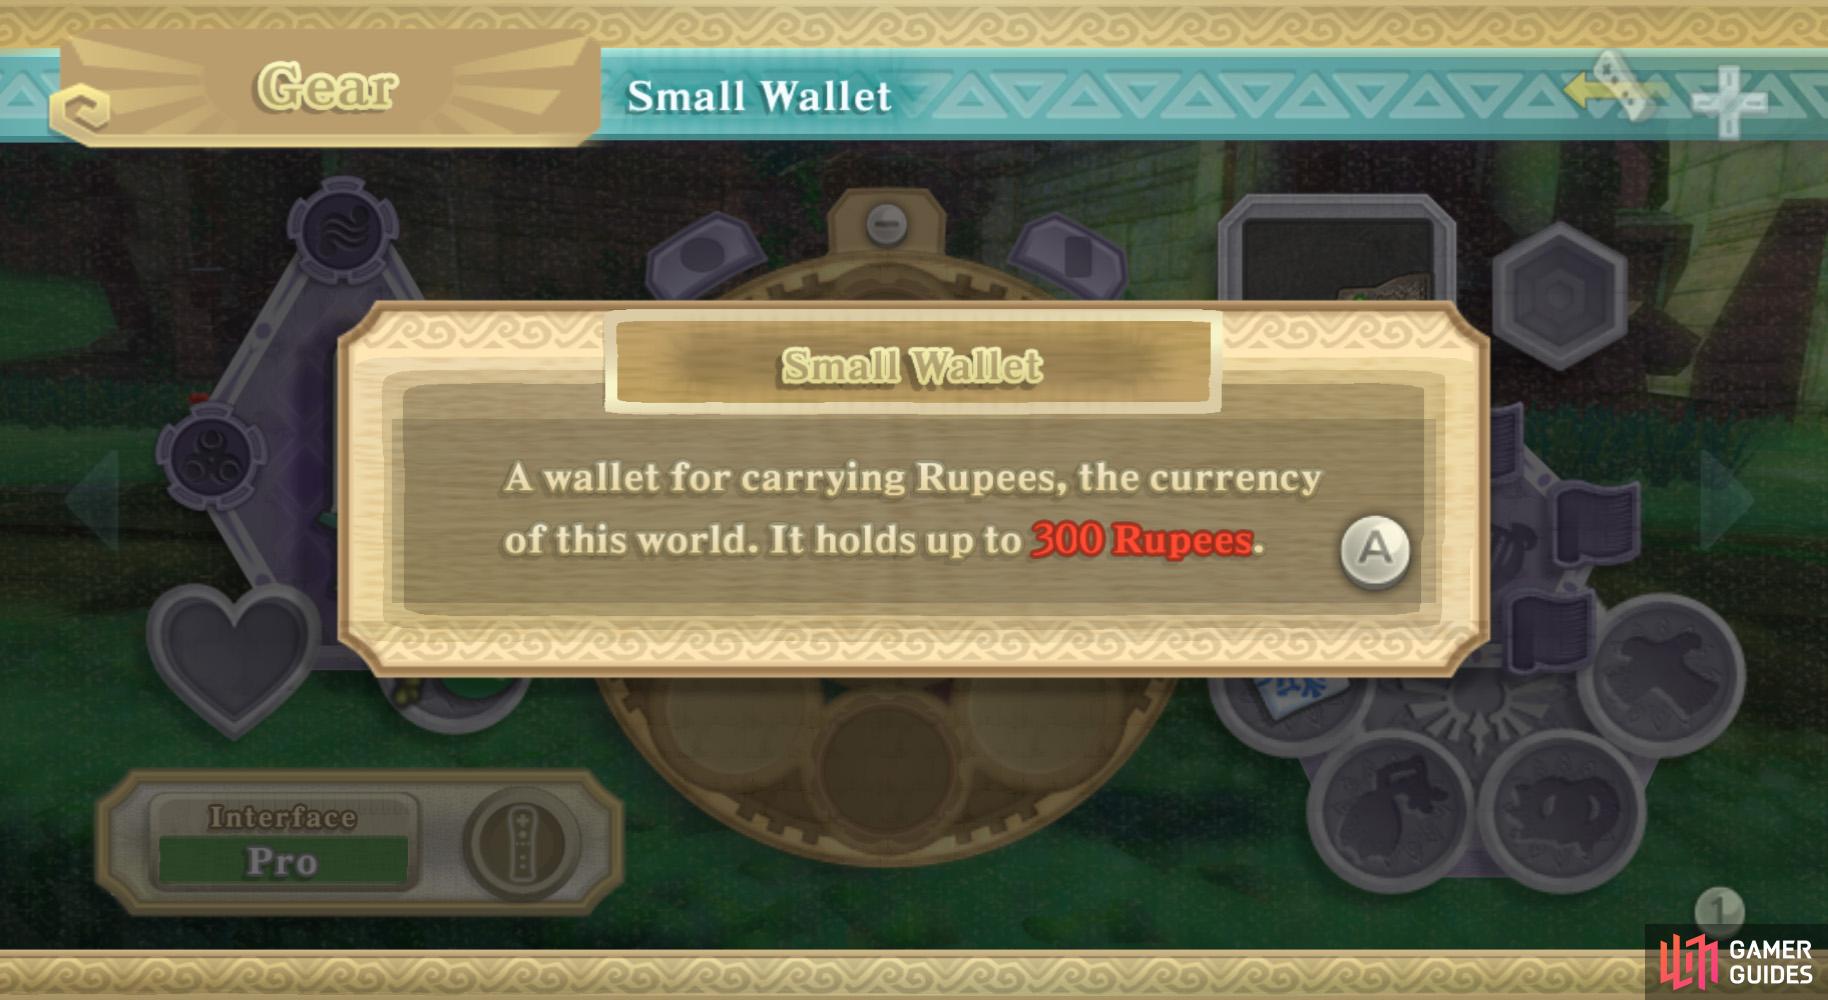 300 Rupees sounds like a lot, but you'll reach that amount before you know it.